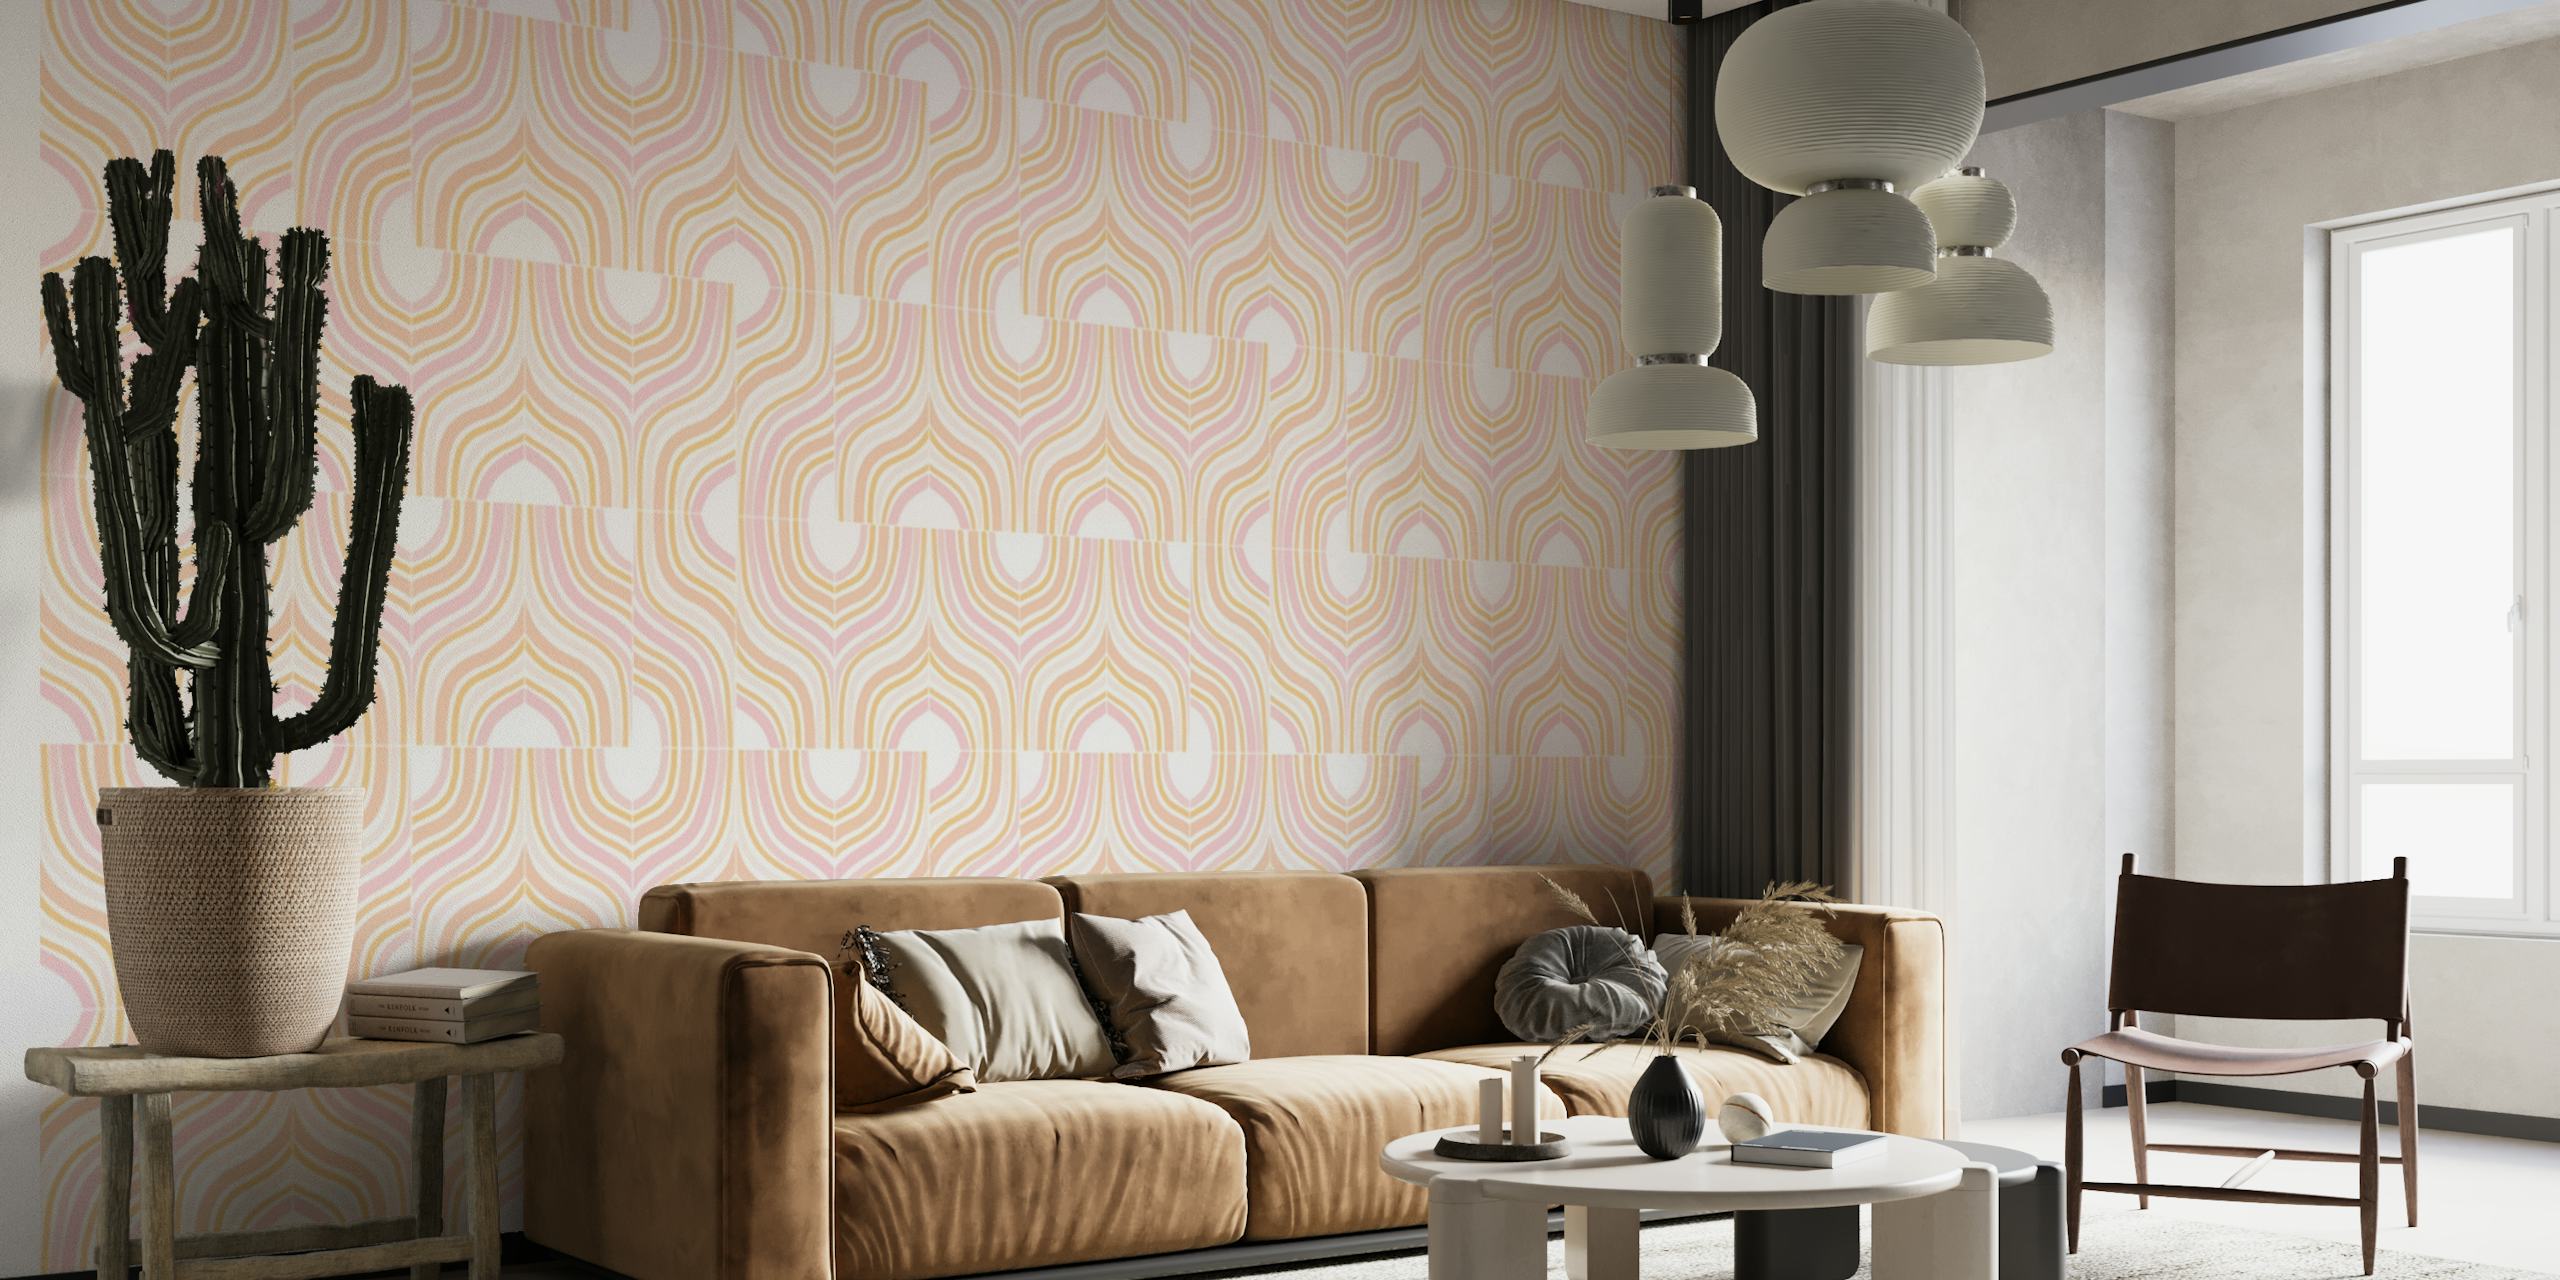 Peachy Mixed Marbled Tiles wallpaper